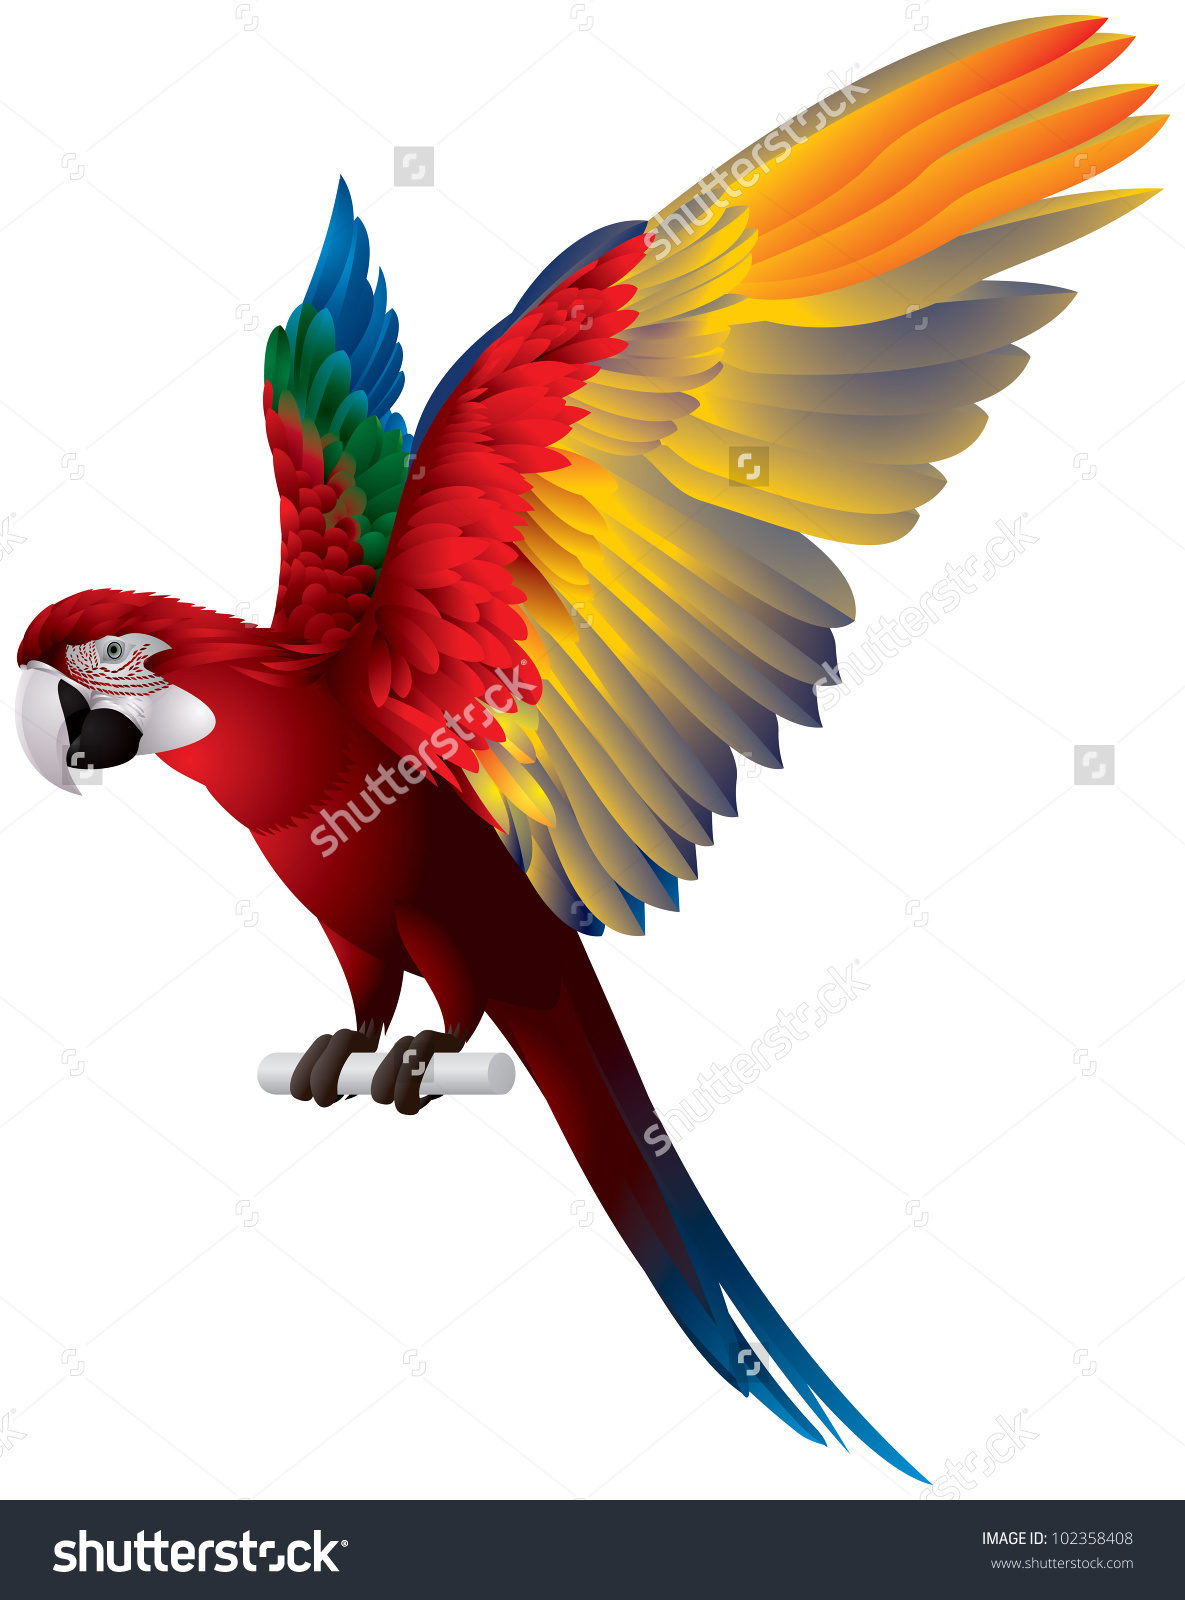 Red-and-green Macaw #22